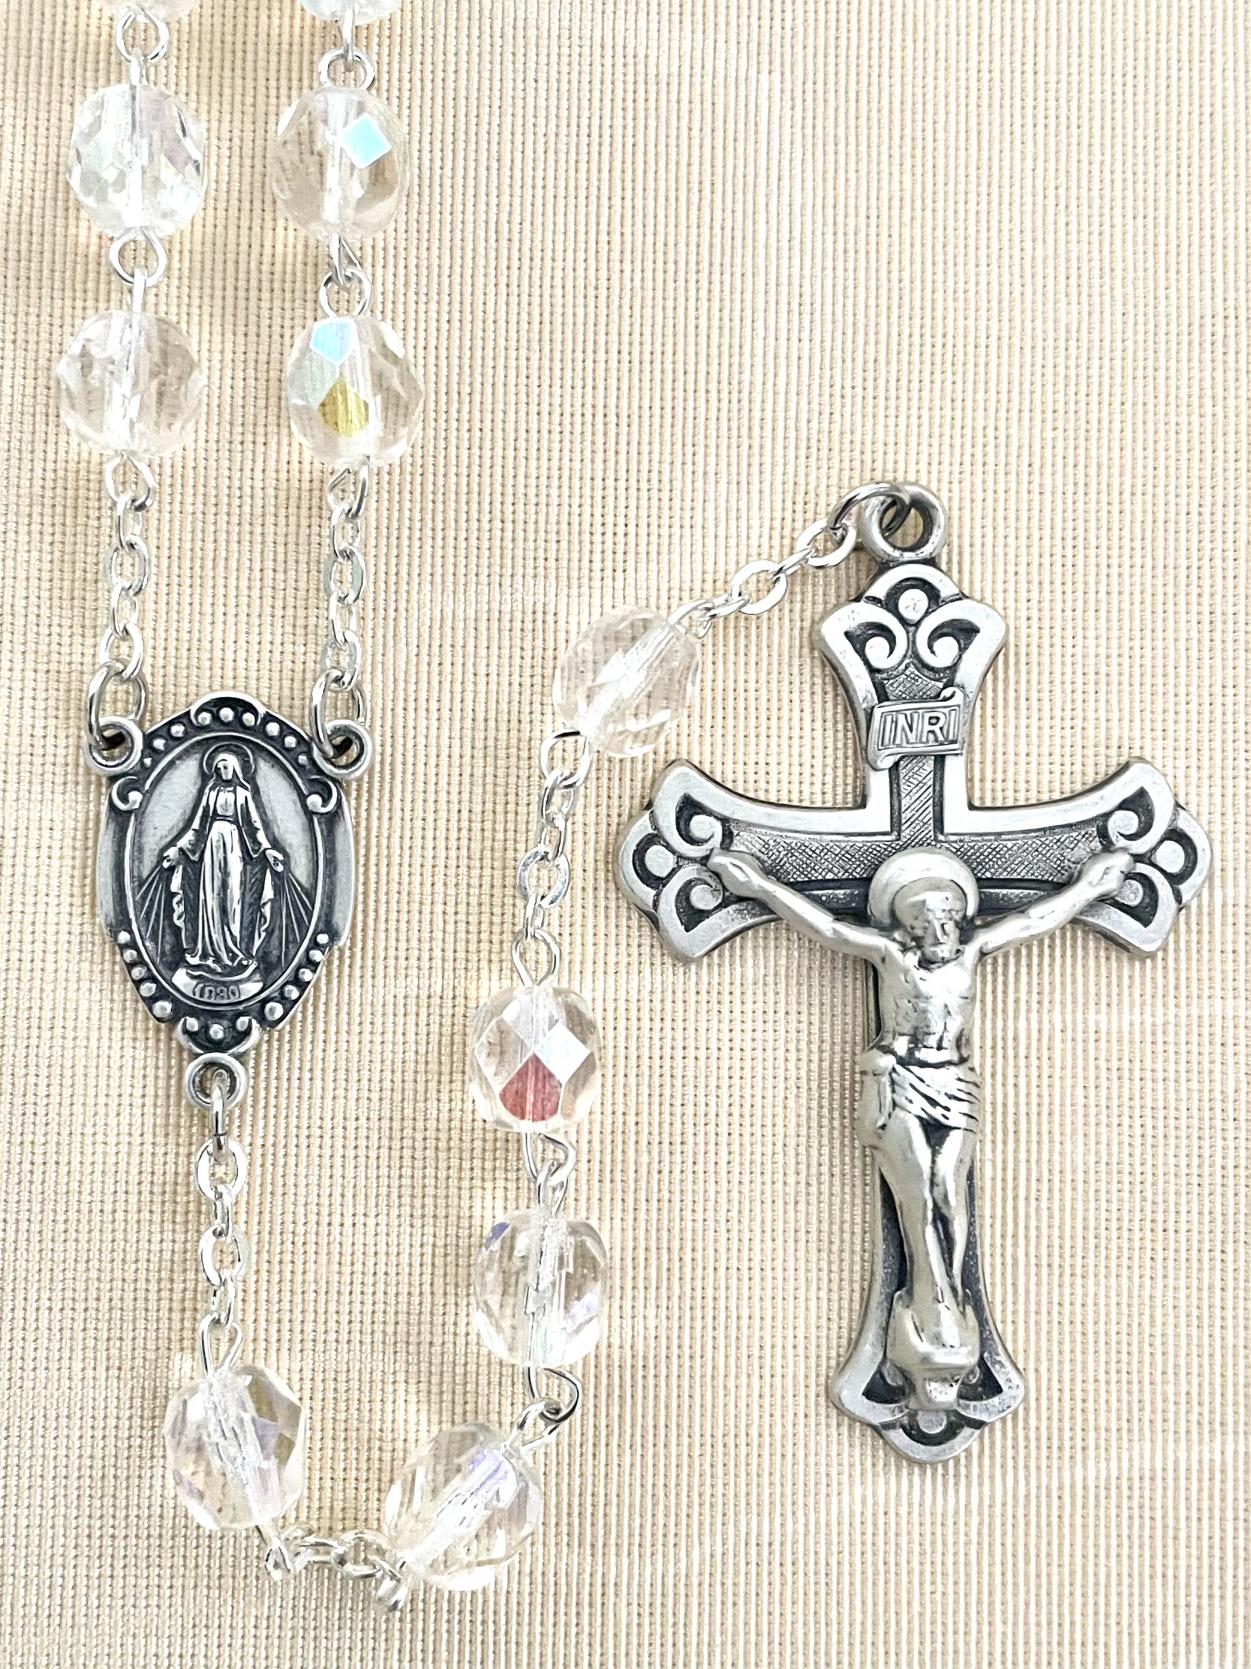 7 mm CRYSTAL AB ROSARY WITH STERLING SILVER CRUCIFIX & CENTER, GIFT BOXED